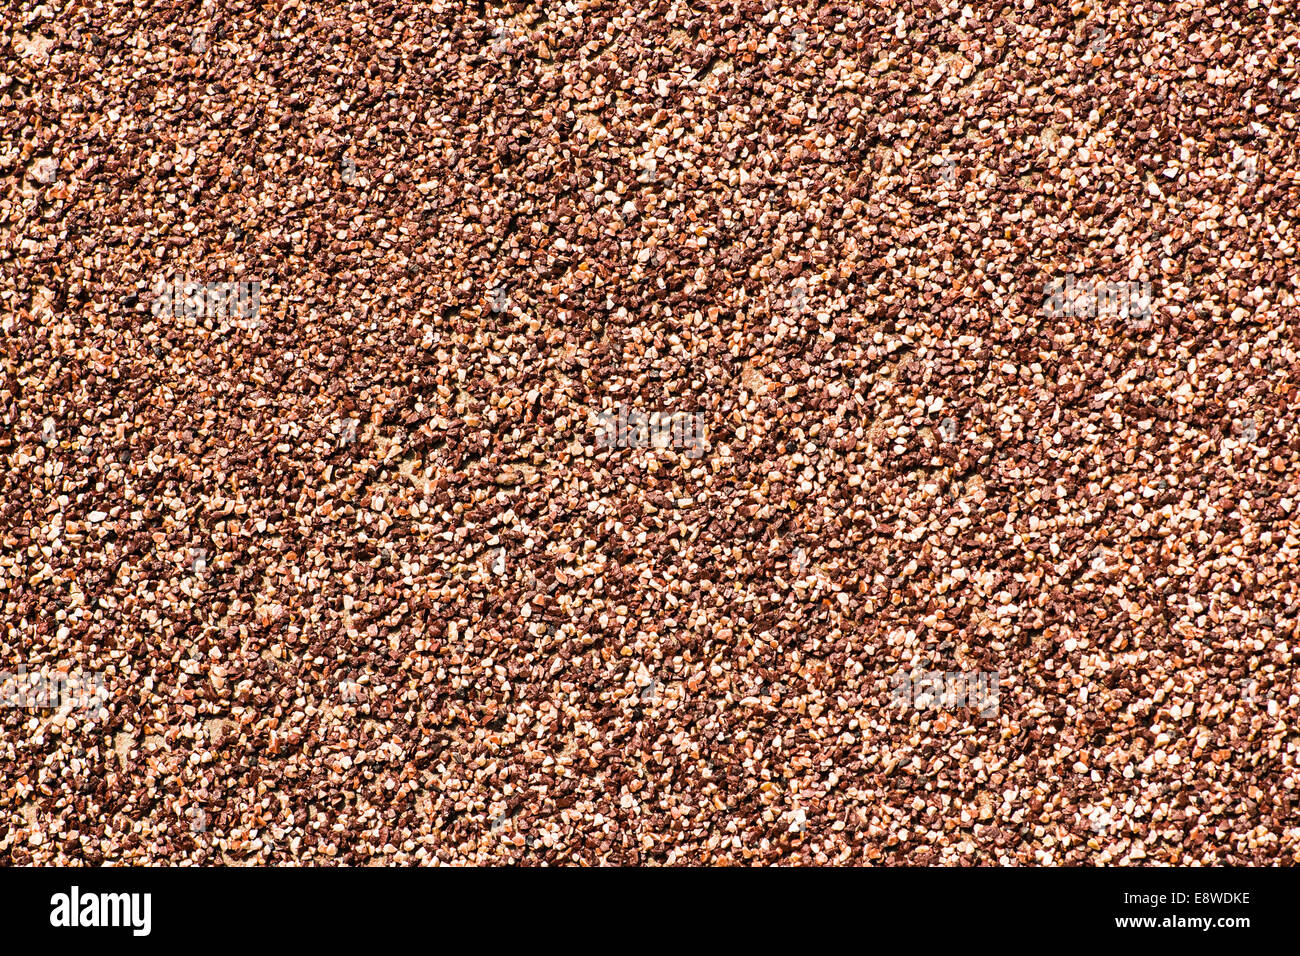 Coarse Grained Texture. Coarse grained texture of red and brown color. Coarse sand Stock Photo